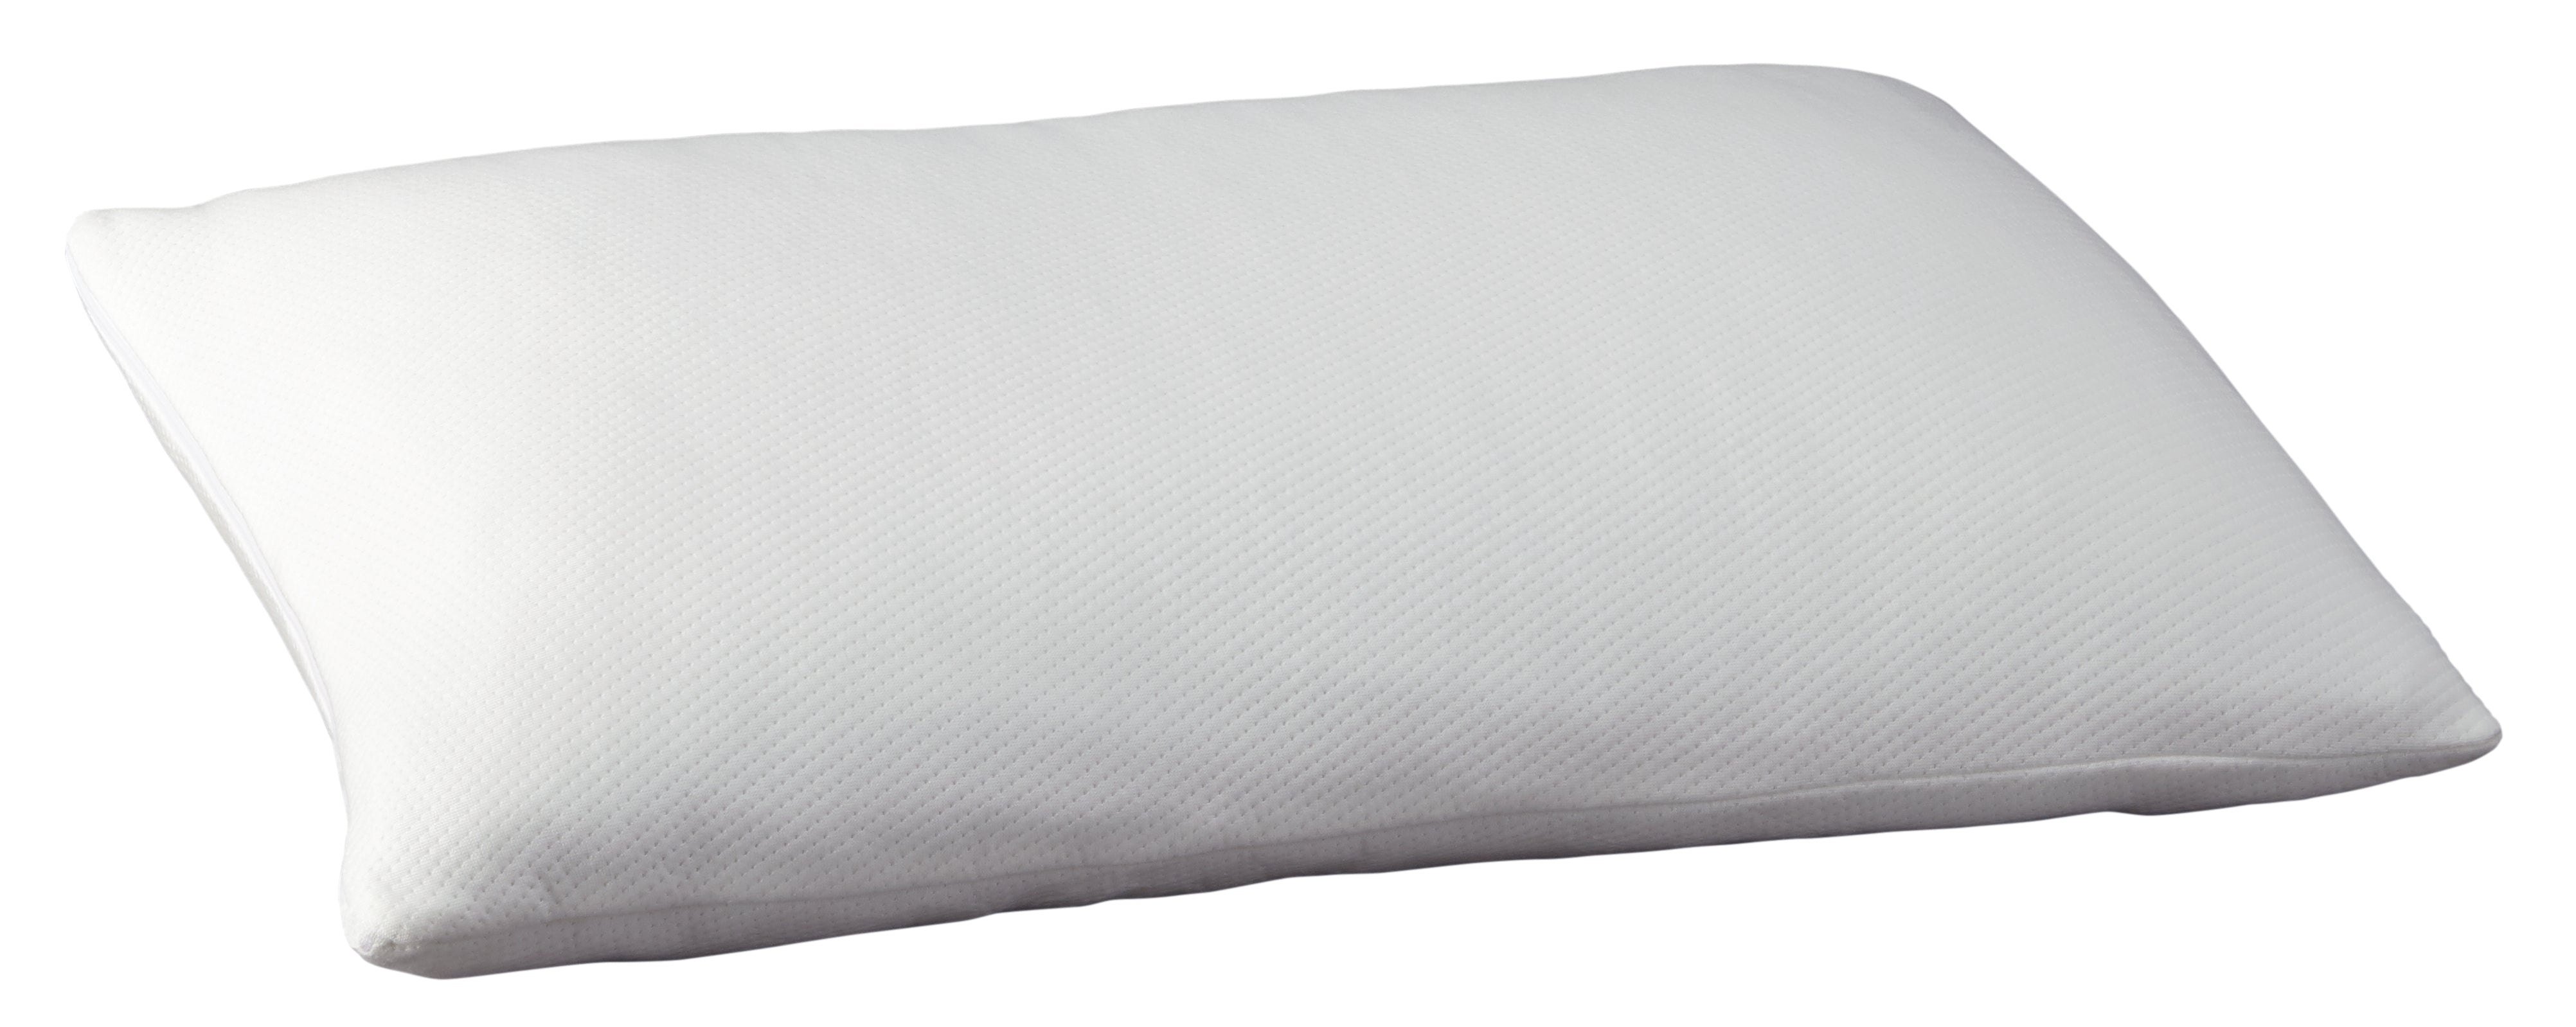 Promotional Memory Foam Pillow - furniture place usa